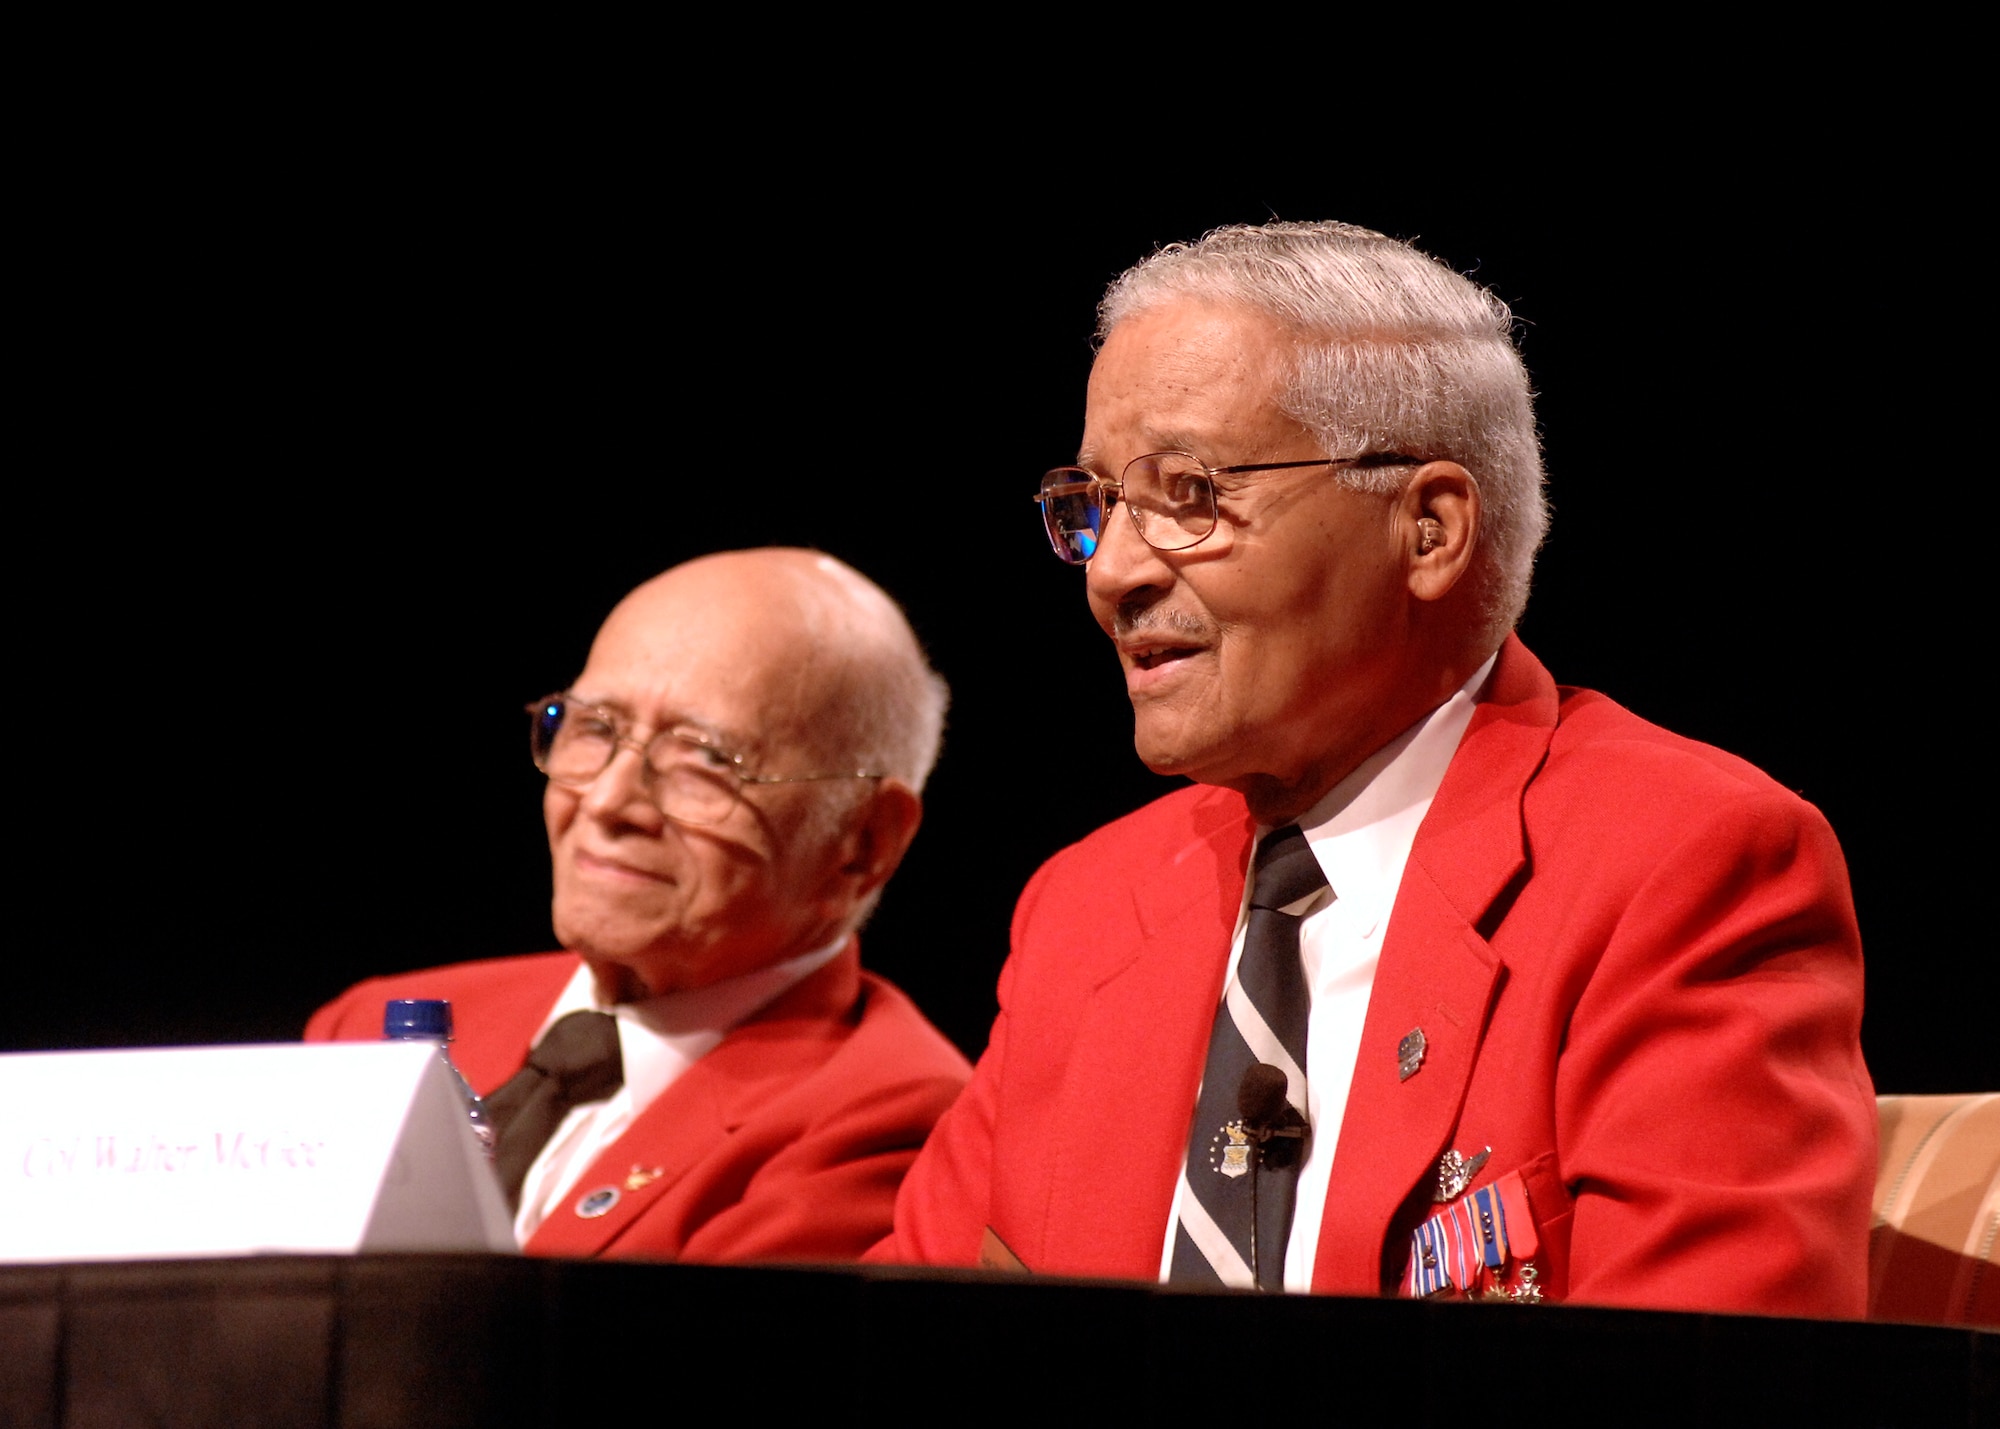 Retired Col. Elmer Jones and retired Col. Charles McGee address an audience during an open forum at the 2009 Air Force Association Air & Space Conference and Technology Exposition Sept. 15, 2009, at the National Harbor in Oxon Hill, Md. Colonels Jones and McGee are original Tuskegee Airmen, and were honored with lifetime achievement awards from Air Force Association officials. (U.S. Air Force photo/Andy Morataya) 